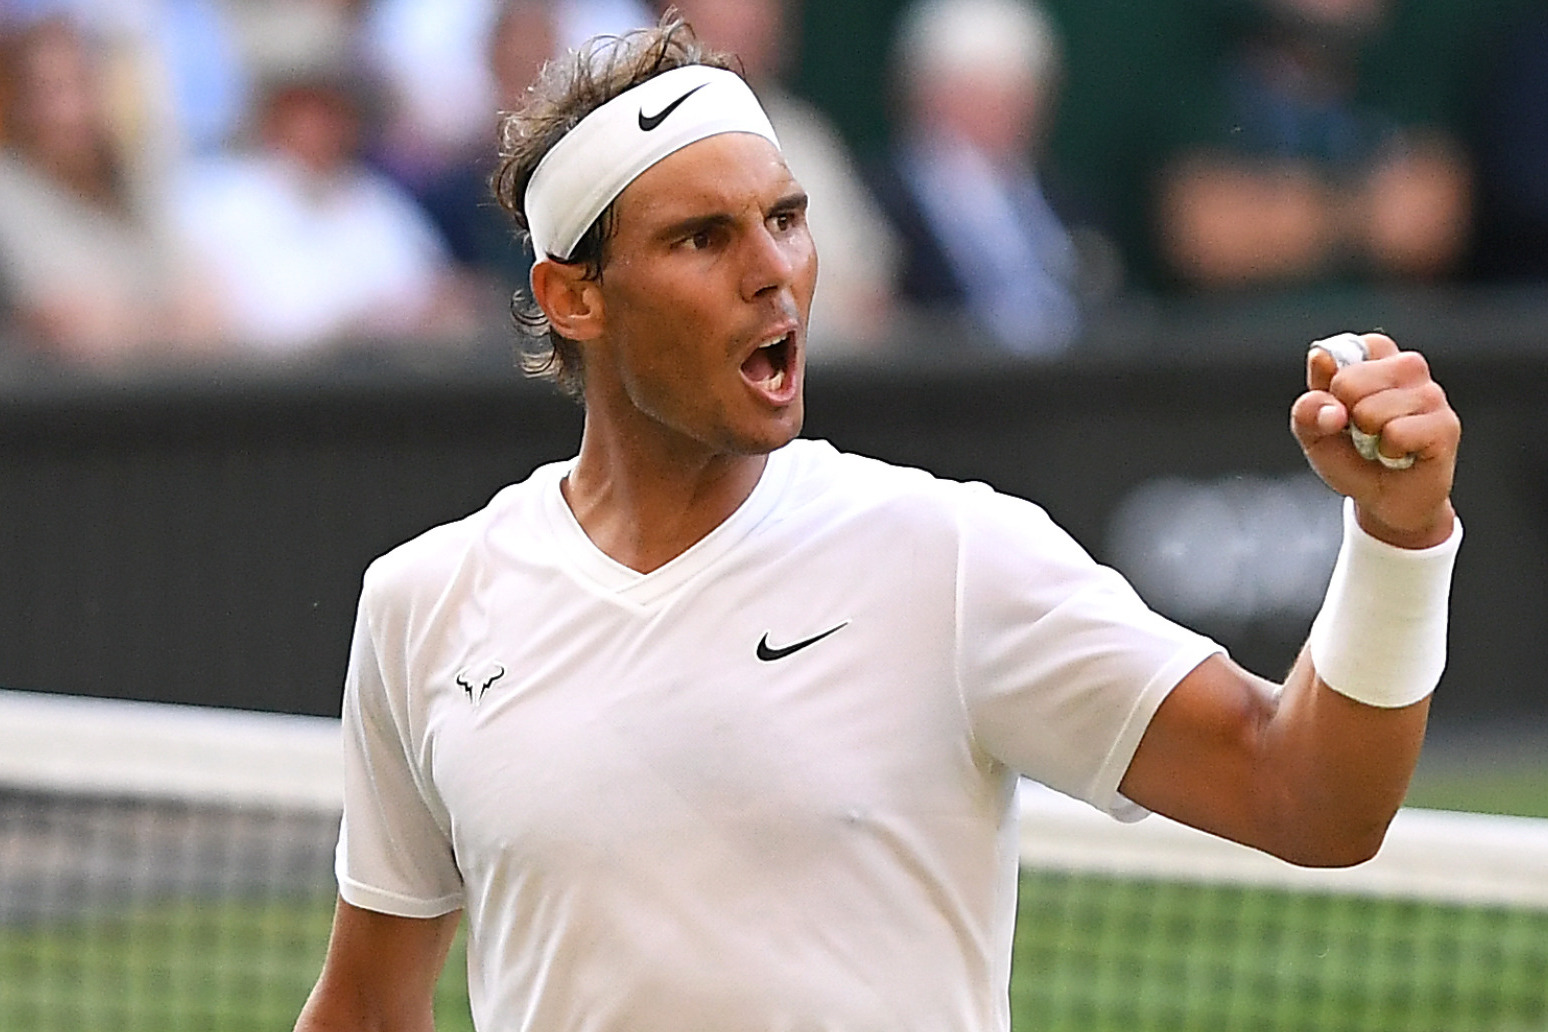 Rafael Nadal to miss rest of season with foot injury 